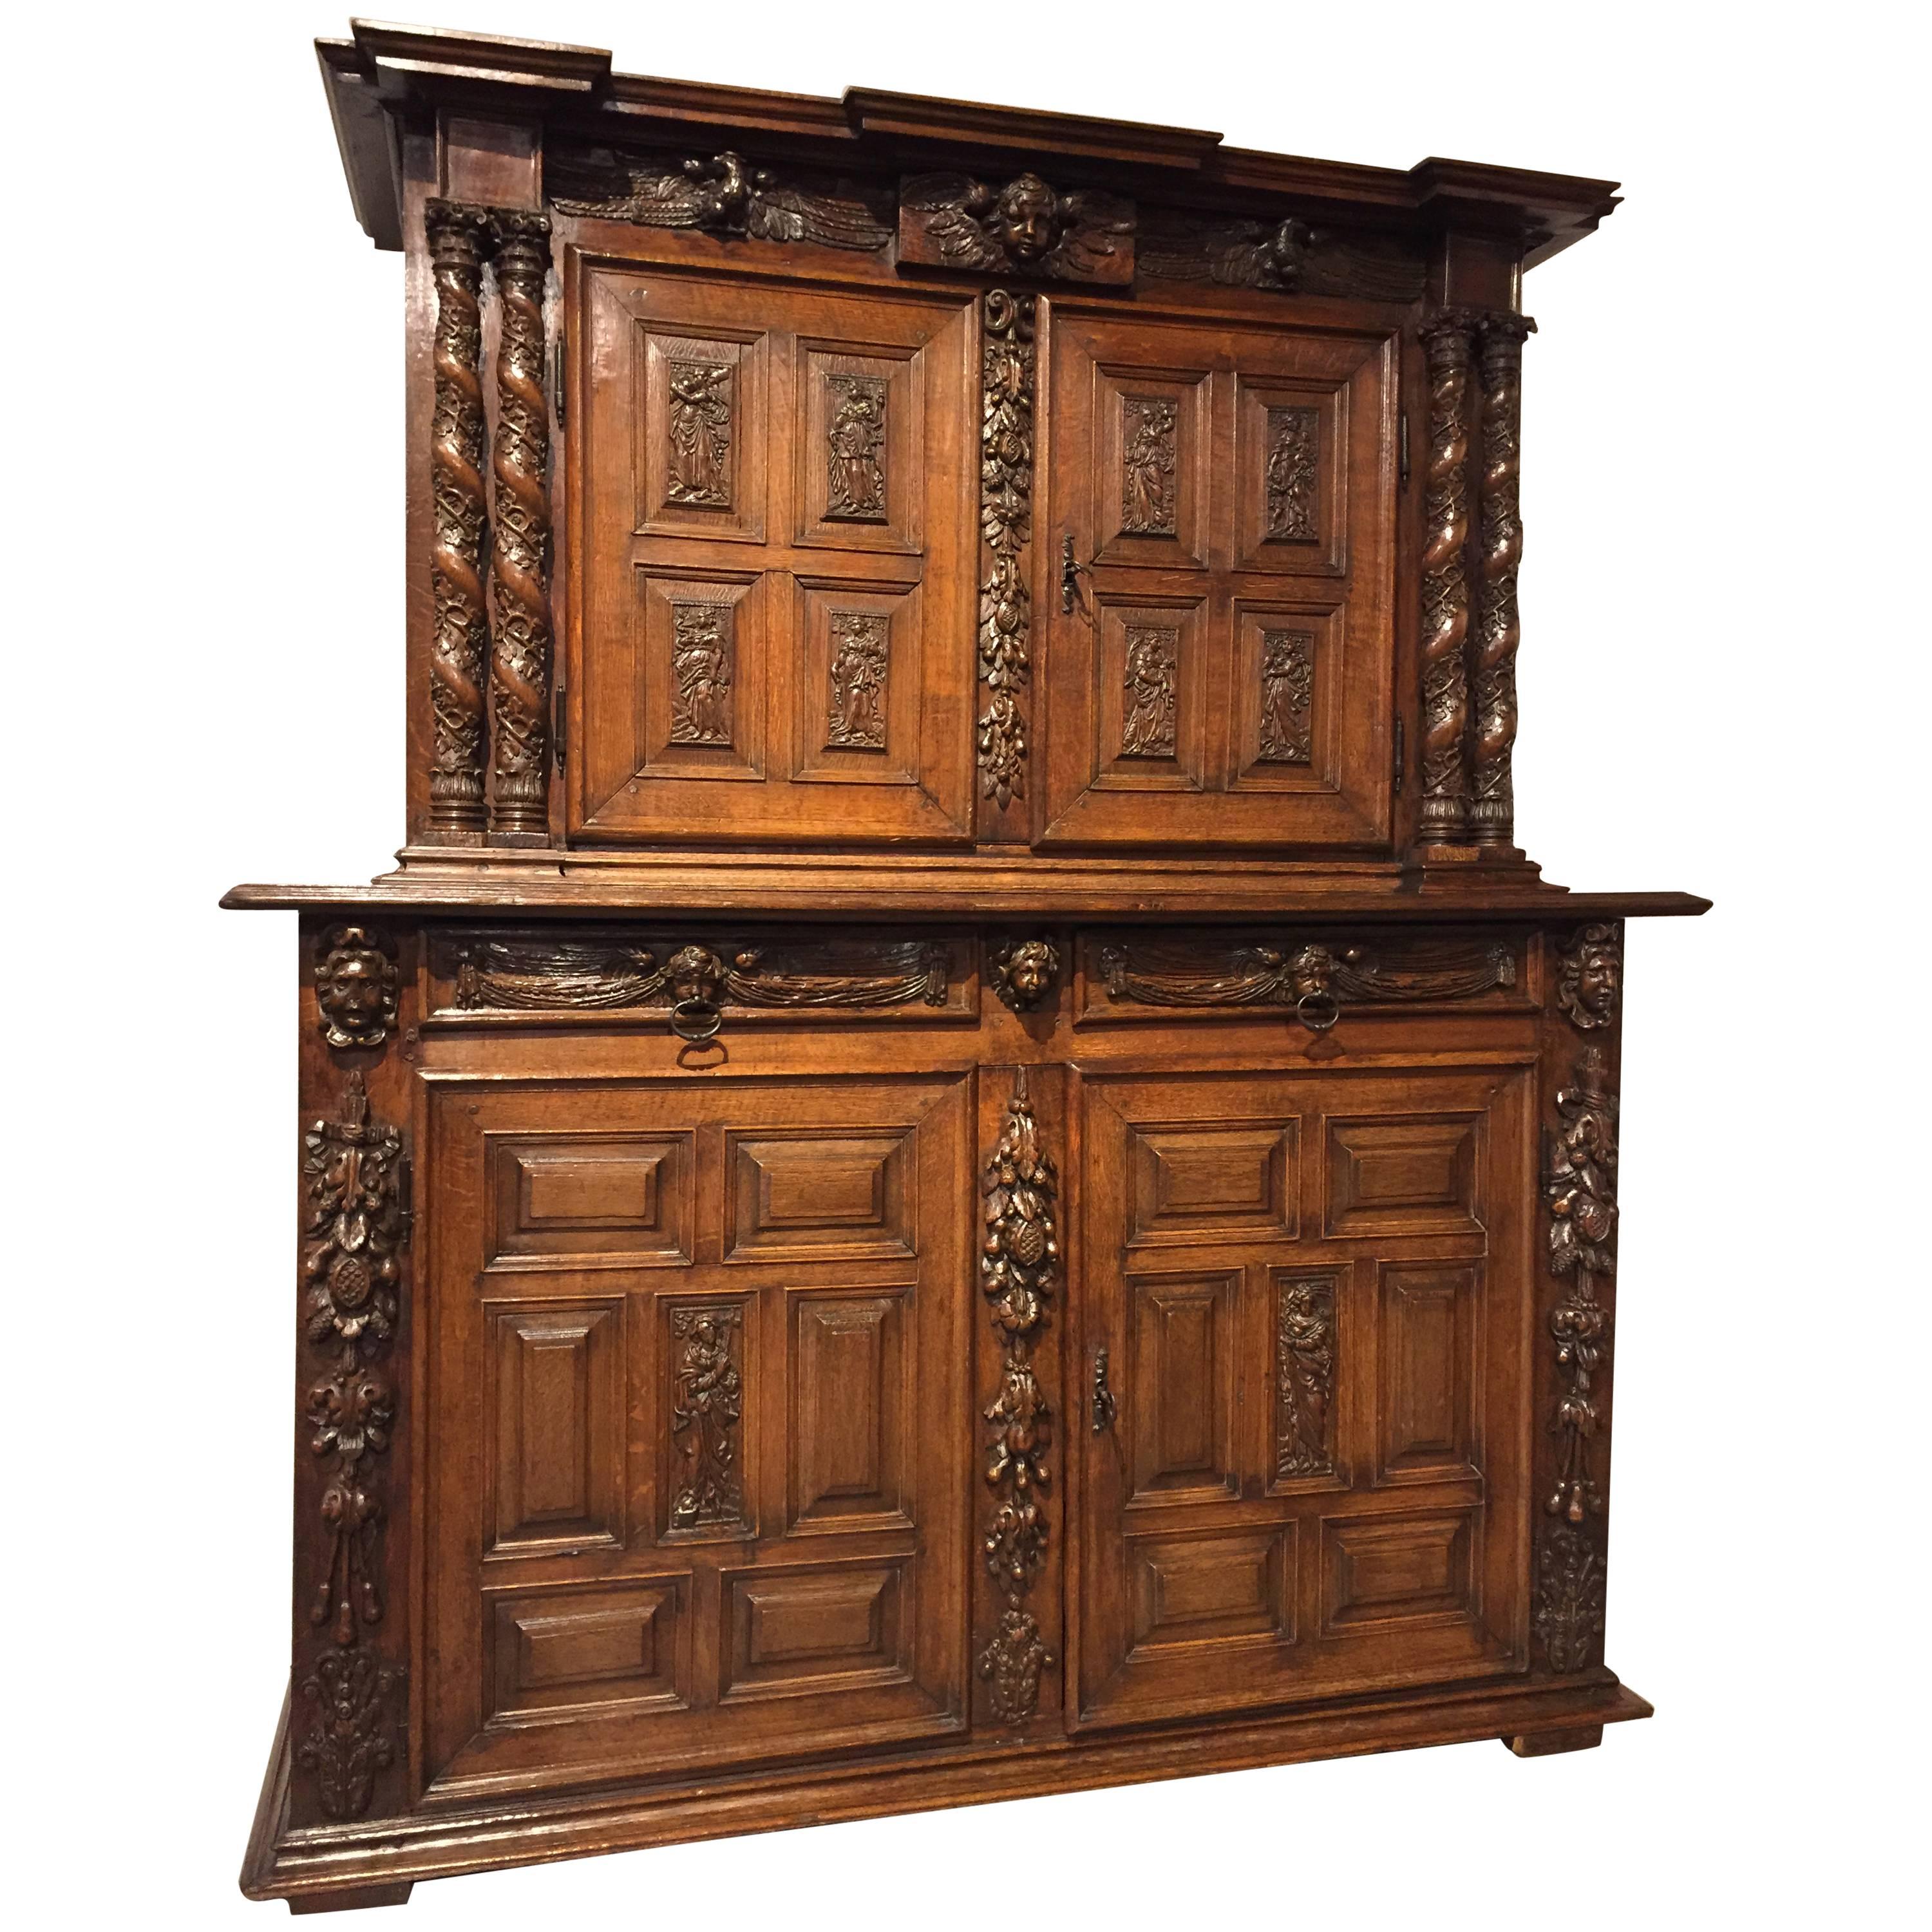 Rare Late Renaissance Cabinet from France, 17th Century